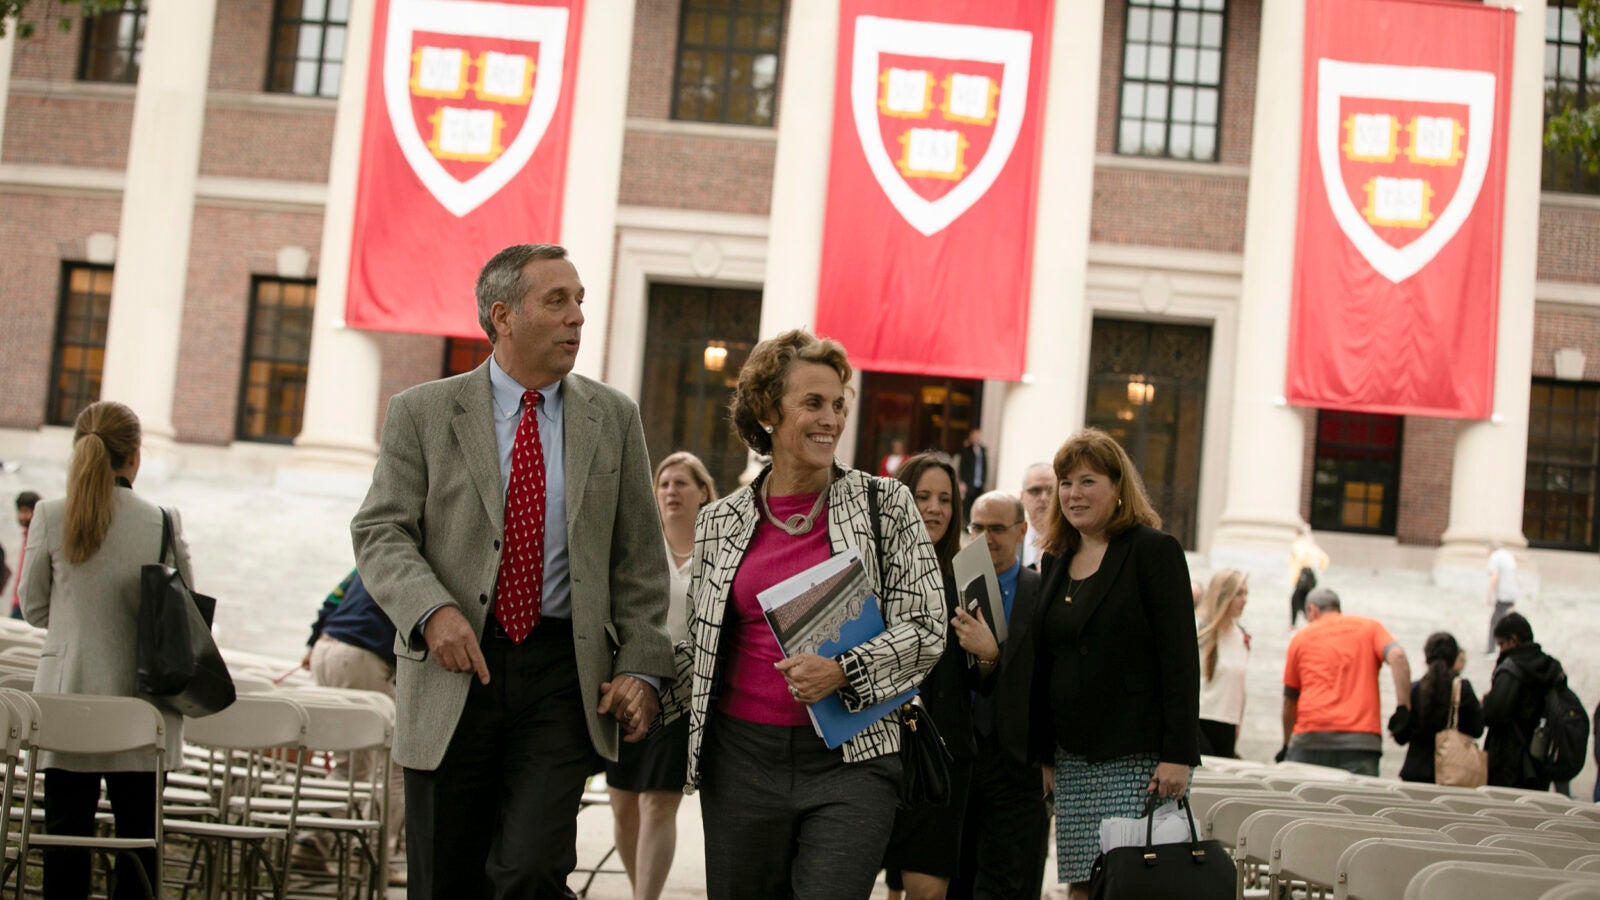 Harvard President Larry Bacow (left) and Adele Bacow walk through the schedule for his Inauguration two days before the event takes place.